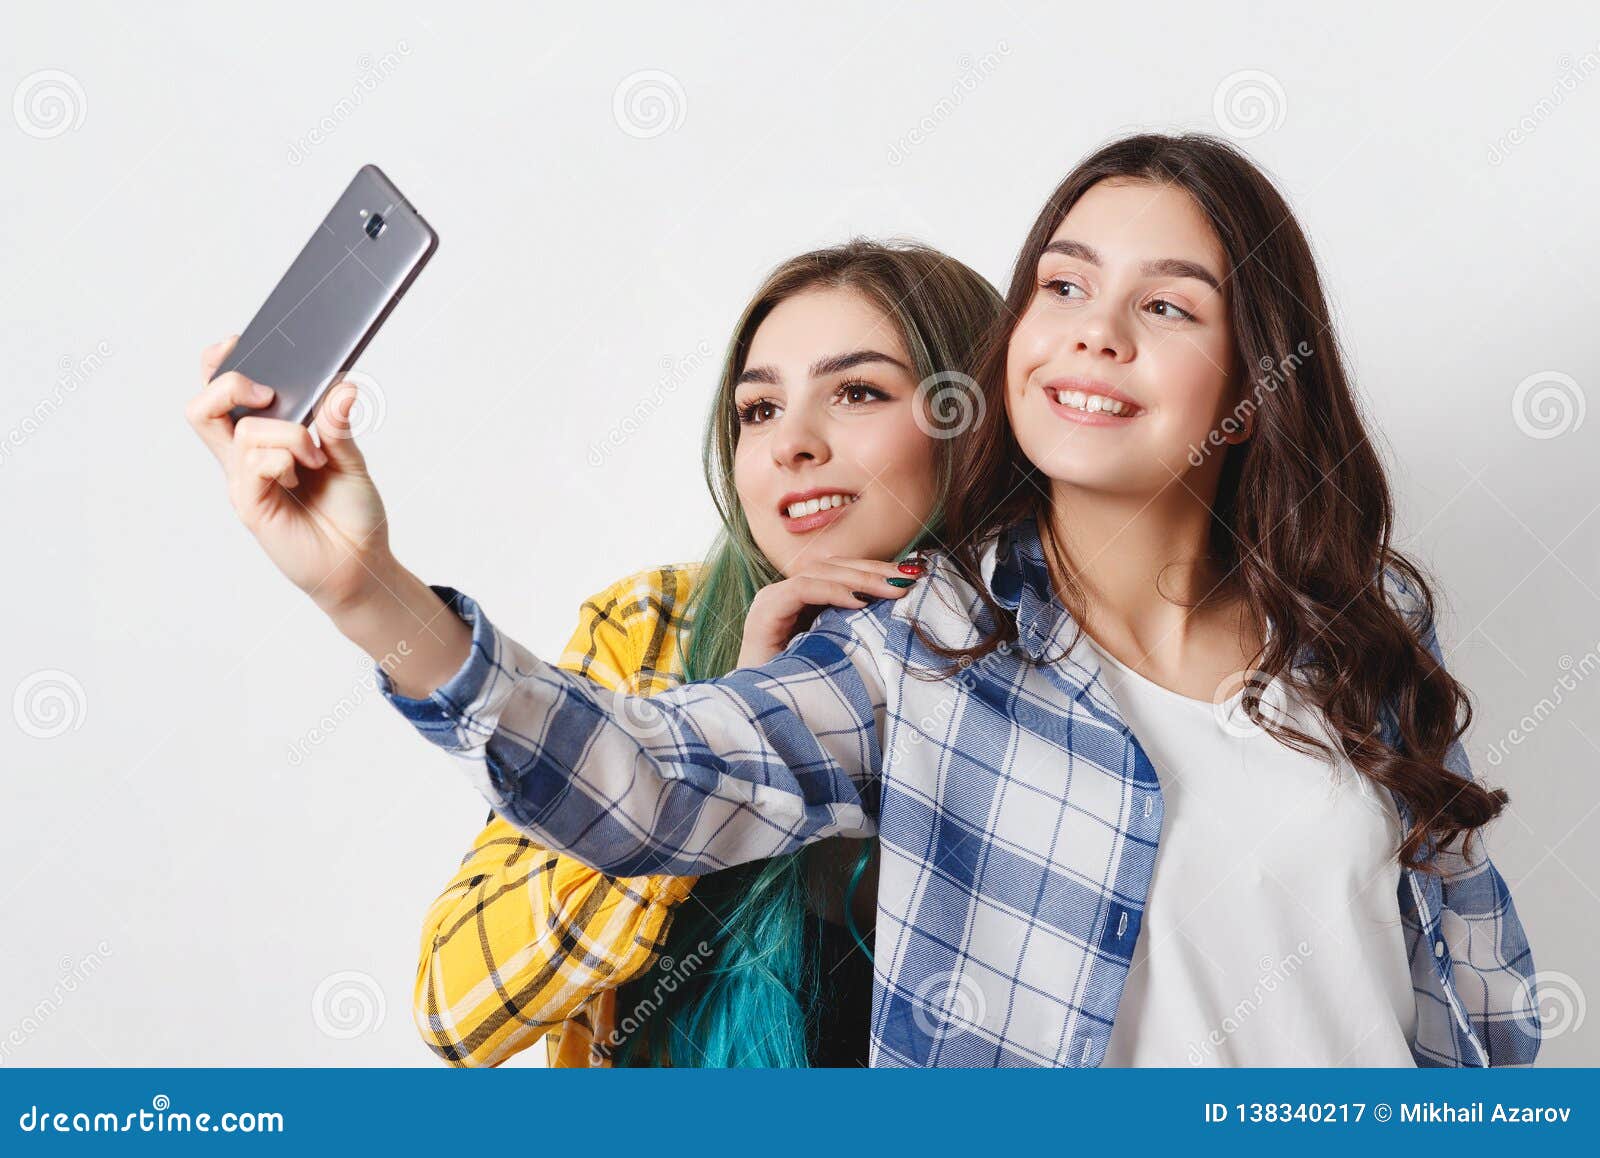 Two Young Women Taking Selfie with Mobile Phone. on White Stock Image ...